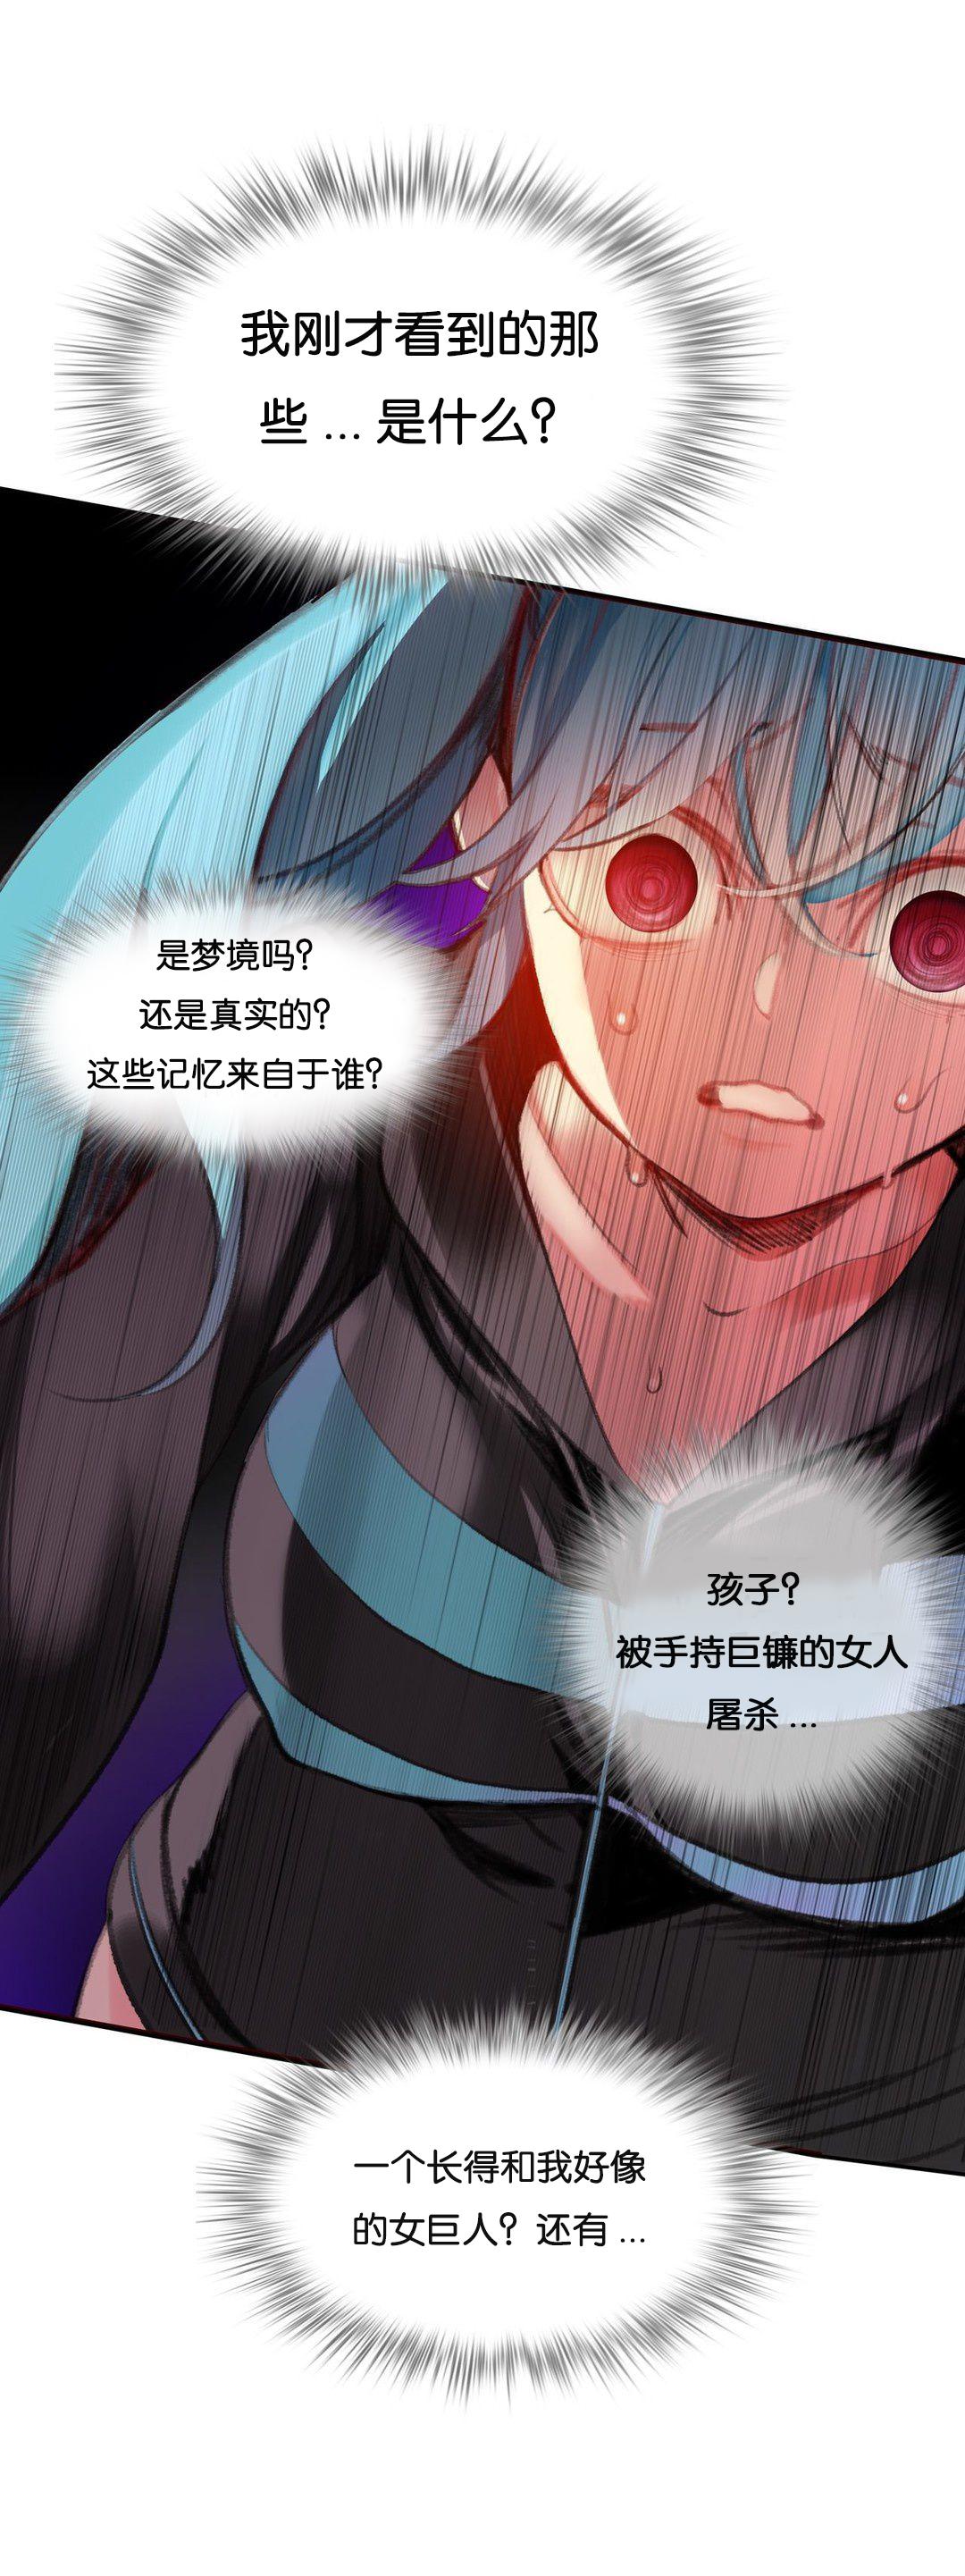 [Juder] Lilith`s Cord (第二季) Ch.61-64 [Chinese] [aaatwist个人汉化] [Ongoing] 75